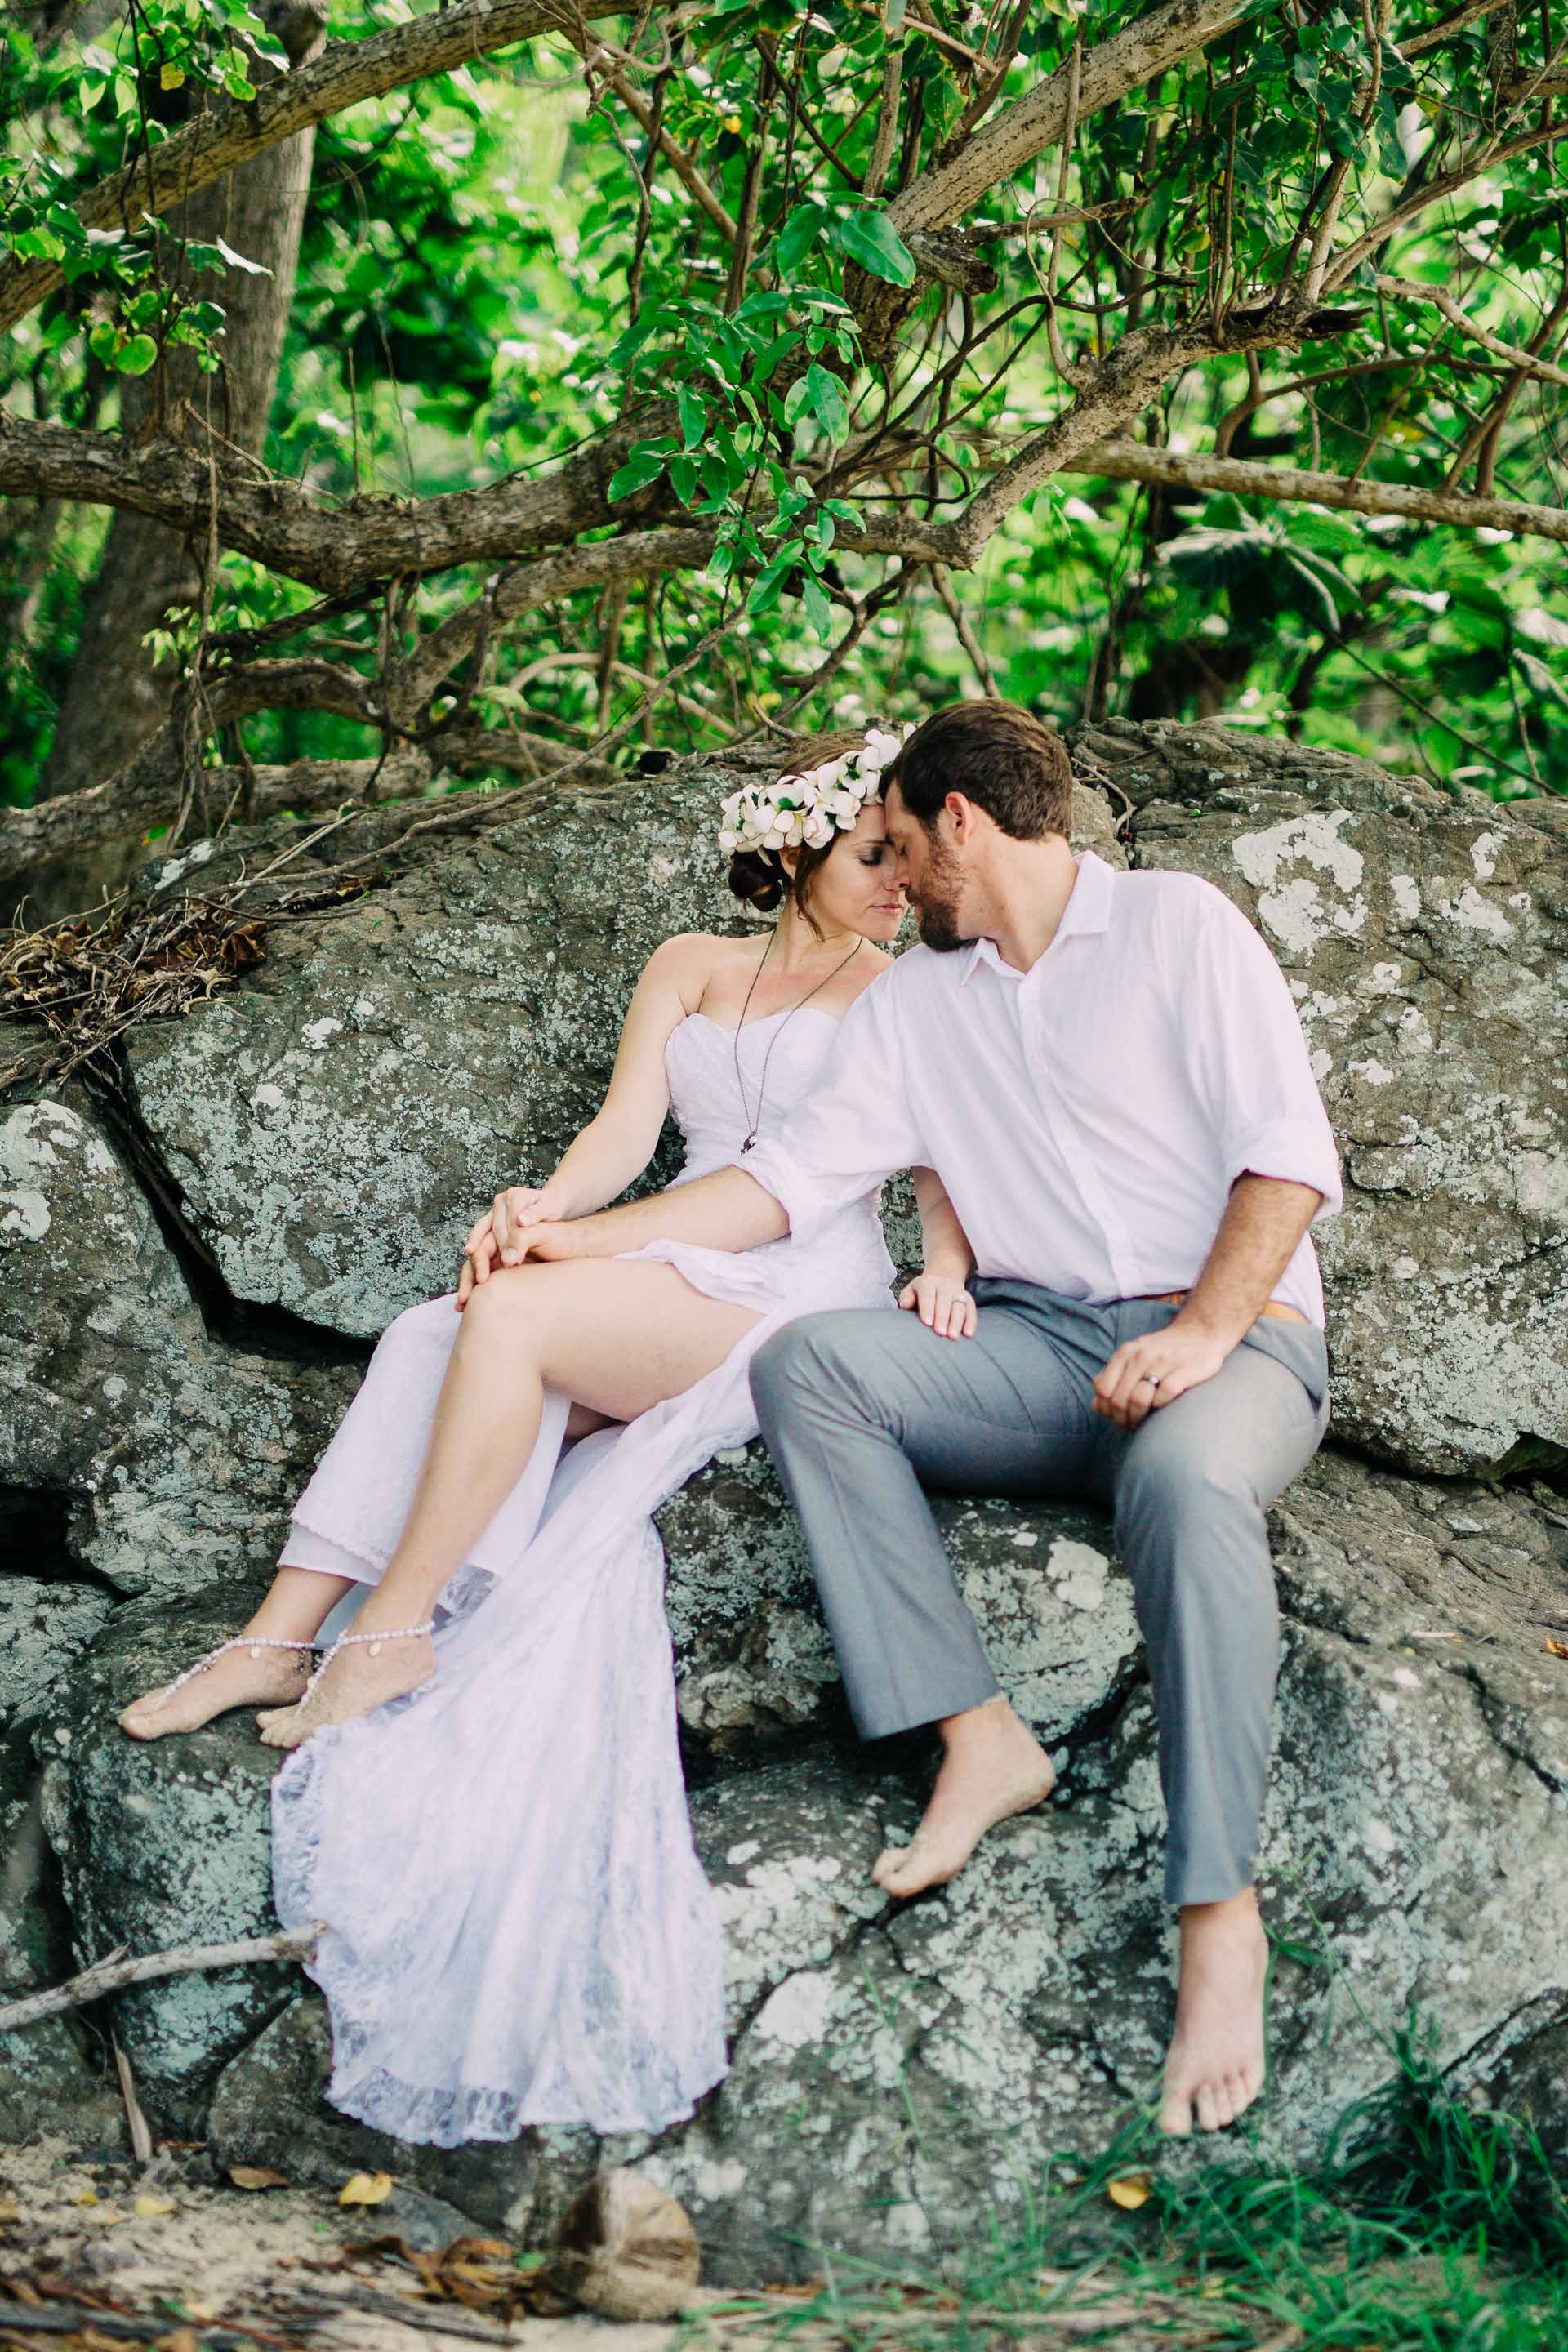 The newlyweds sitting on a rock together in the bush